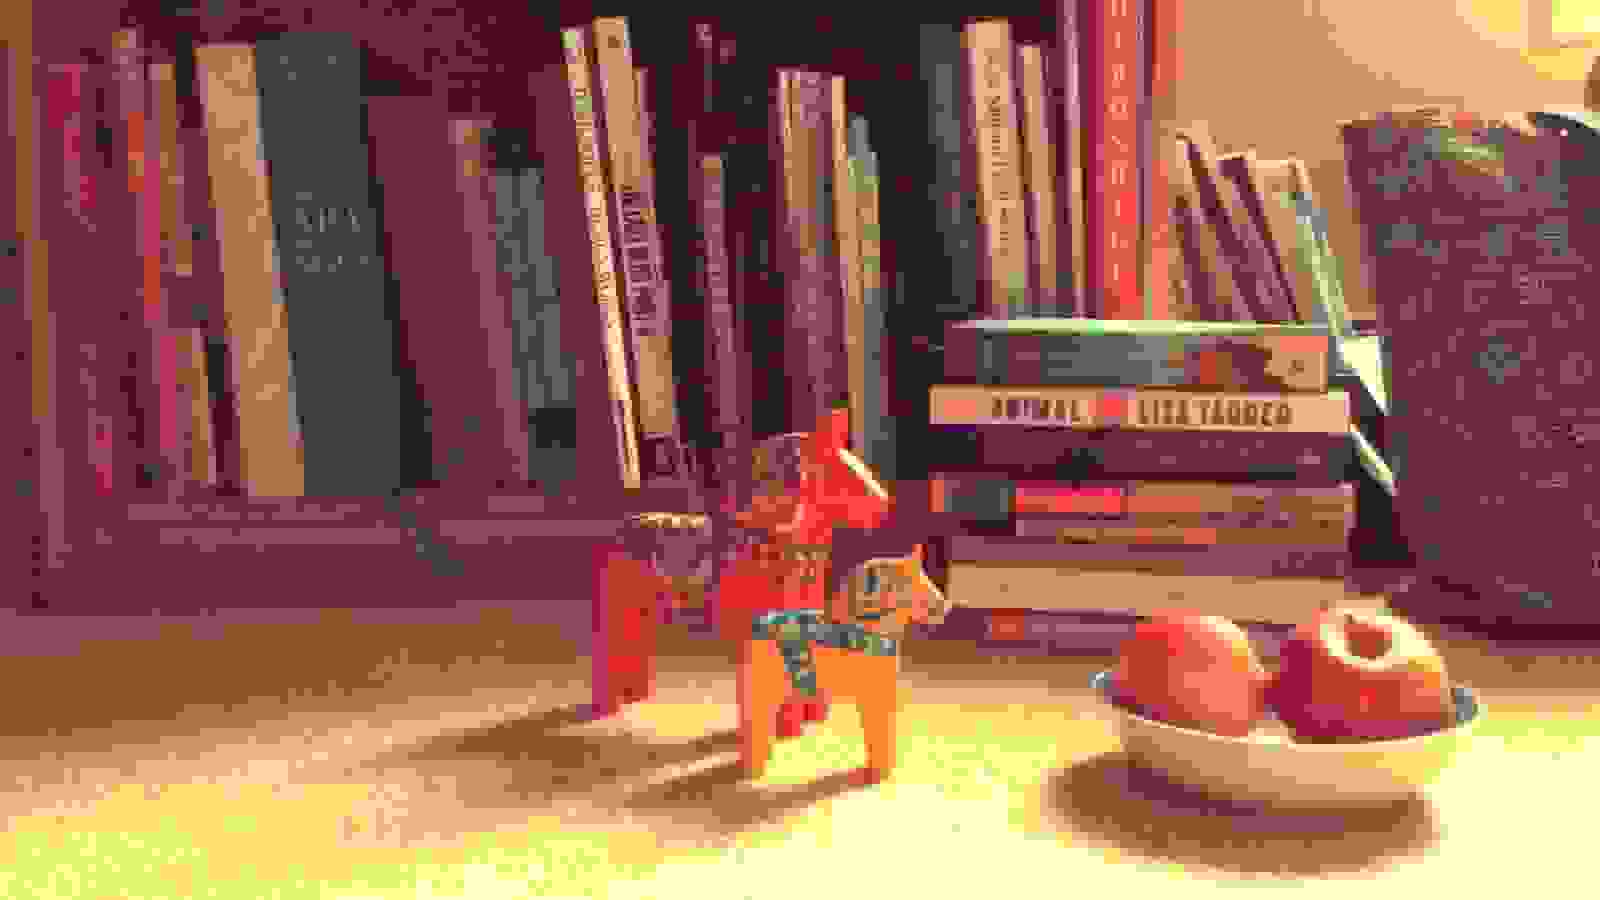 Here is a film still of two horse figurines standing in front of a row of books.